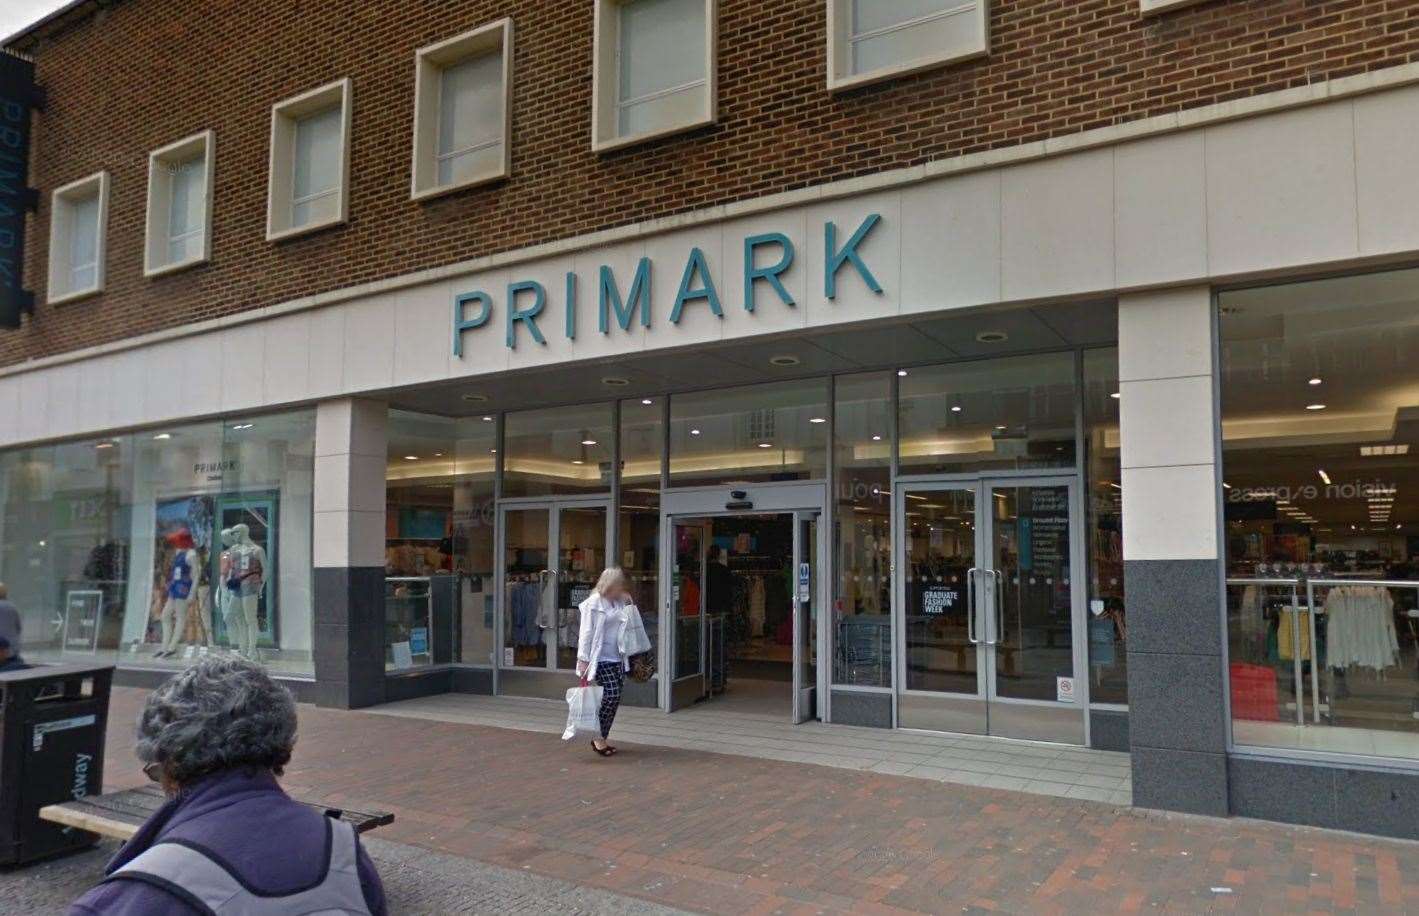 The alleged incident happened at the Primark in Chatham High Street. Picture: Google